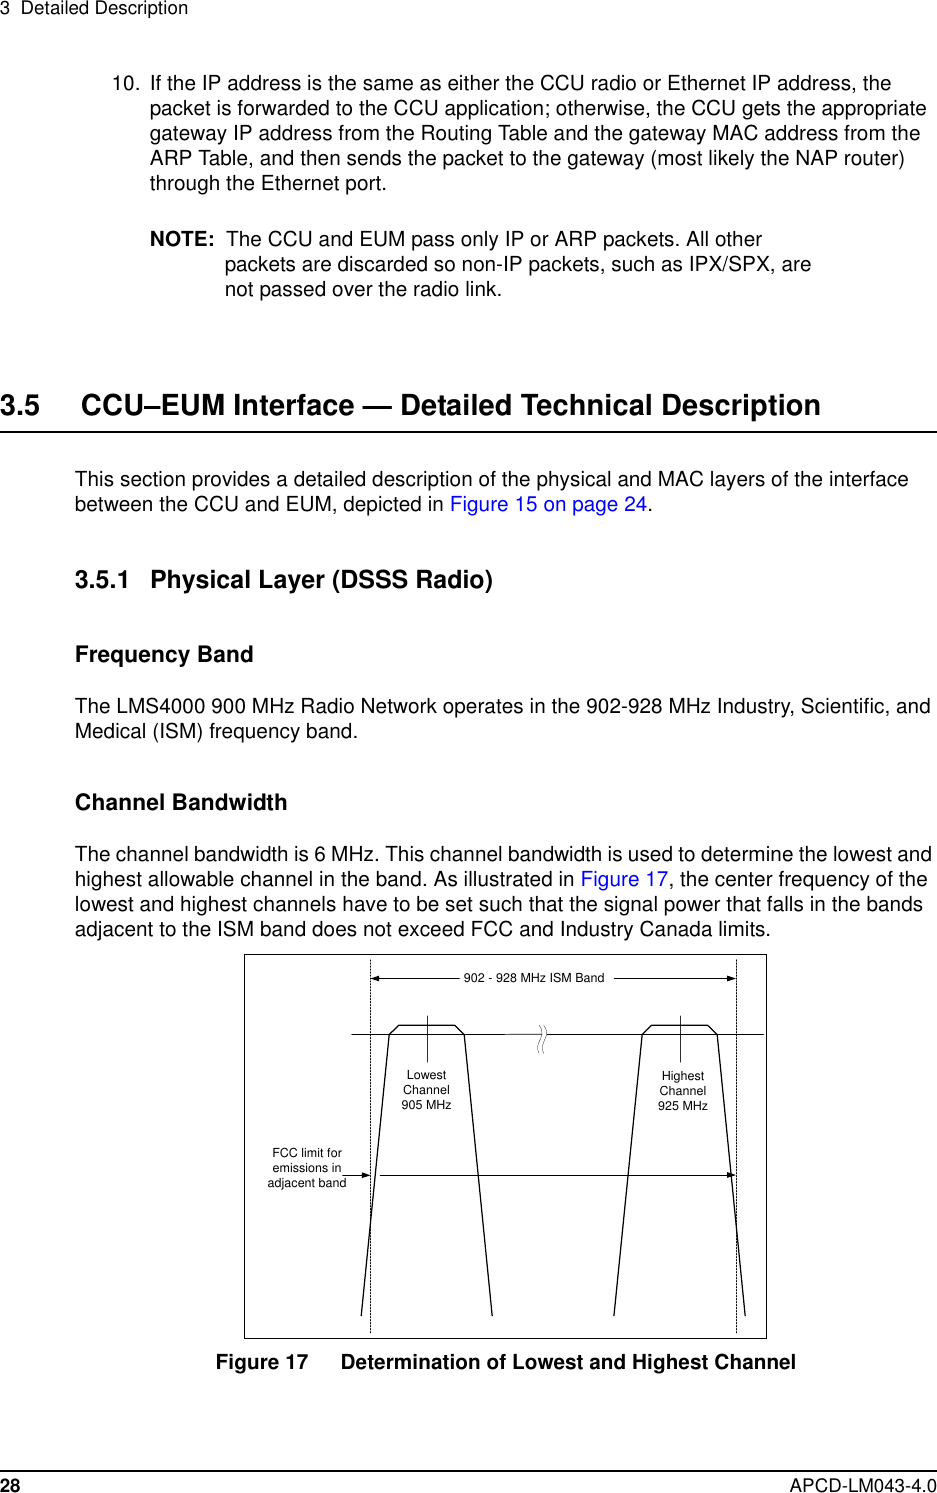 3 Detailed Description28 APCD-LM043-4.010. If the IP address is the same as either the CCU radio or Ethernet IP address, thepacket is forwarded to the CCU application; otherwise, the CCU gets the appropriategateway IP address from the Routing Table and the gateway MAC address from theARP Table, and then sends the packet to the gateway (most likely the NAP router)through the Ethernet port.NOTE: The CCU and EUM pass only IP or ARP packets. All otherpackets are discarded so non-IP packets, such as IPX/SPX, arenot passed over the radio link.3.5 CCU–EUM Interface — Detailed Technical DescriptionThis section provides a detailed description of the physical and MAC layers of the interfacebetween the CCU and EUM, depicted in Figure 15 on page 24.3.5.1 Physical Layer (DSSS Radio)Frequency BandThe LMS4000 900 MHz Radio Network operates in the 902-928 MHz Industry, Scientific, andMedical (ISM) frequency band.Channel BandwidthThe channel bandwidth is 6 MHz. This channel bandwidth is used to determine the lowest andhighest allowable channel in the band. As illustrated in Figure 17, the center frequency of thelowest and highest channels have to be set such that the signal power that falls in the bandsadjacent to the ISM band does not exceed FCC and Industry Canada limits.Figure 17 Determination of Lowest and Highest Channel902 - 928 MHz ISM BandFCC limit foremissions inadjacent bandLowestChannel905 MHzHighestChannel925 MHz